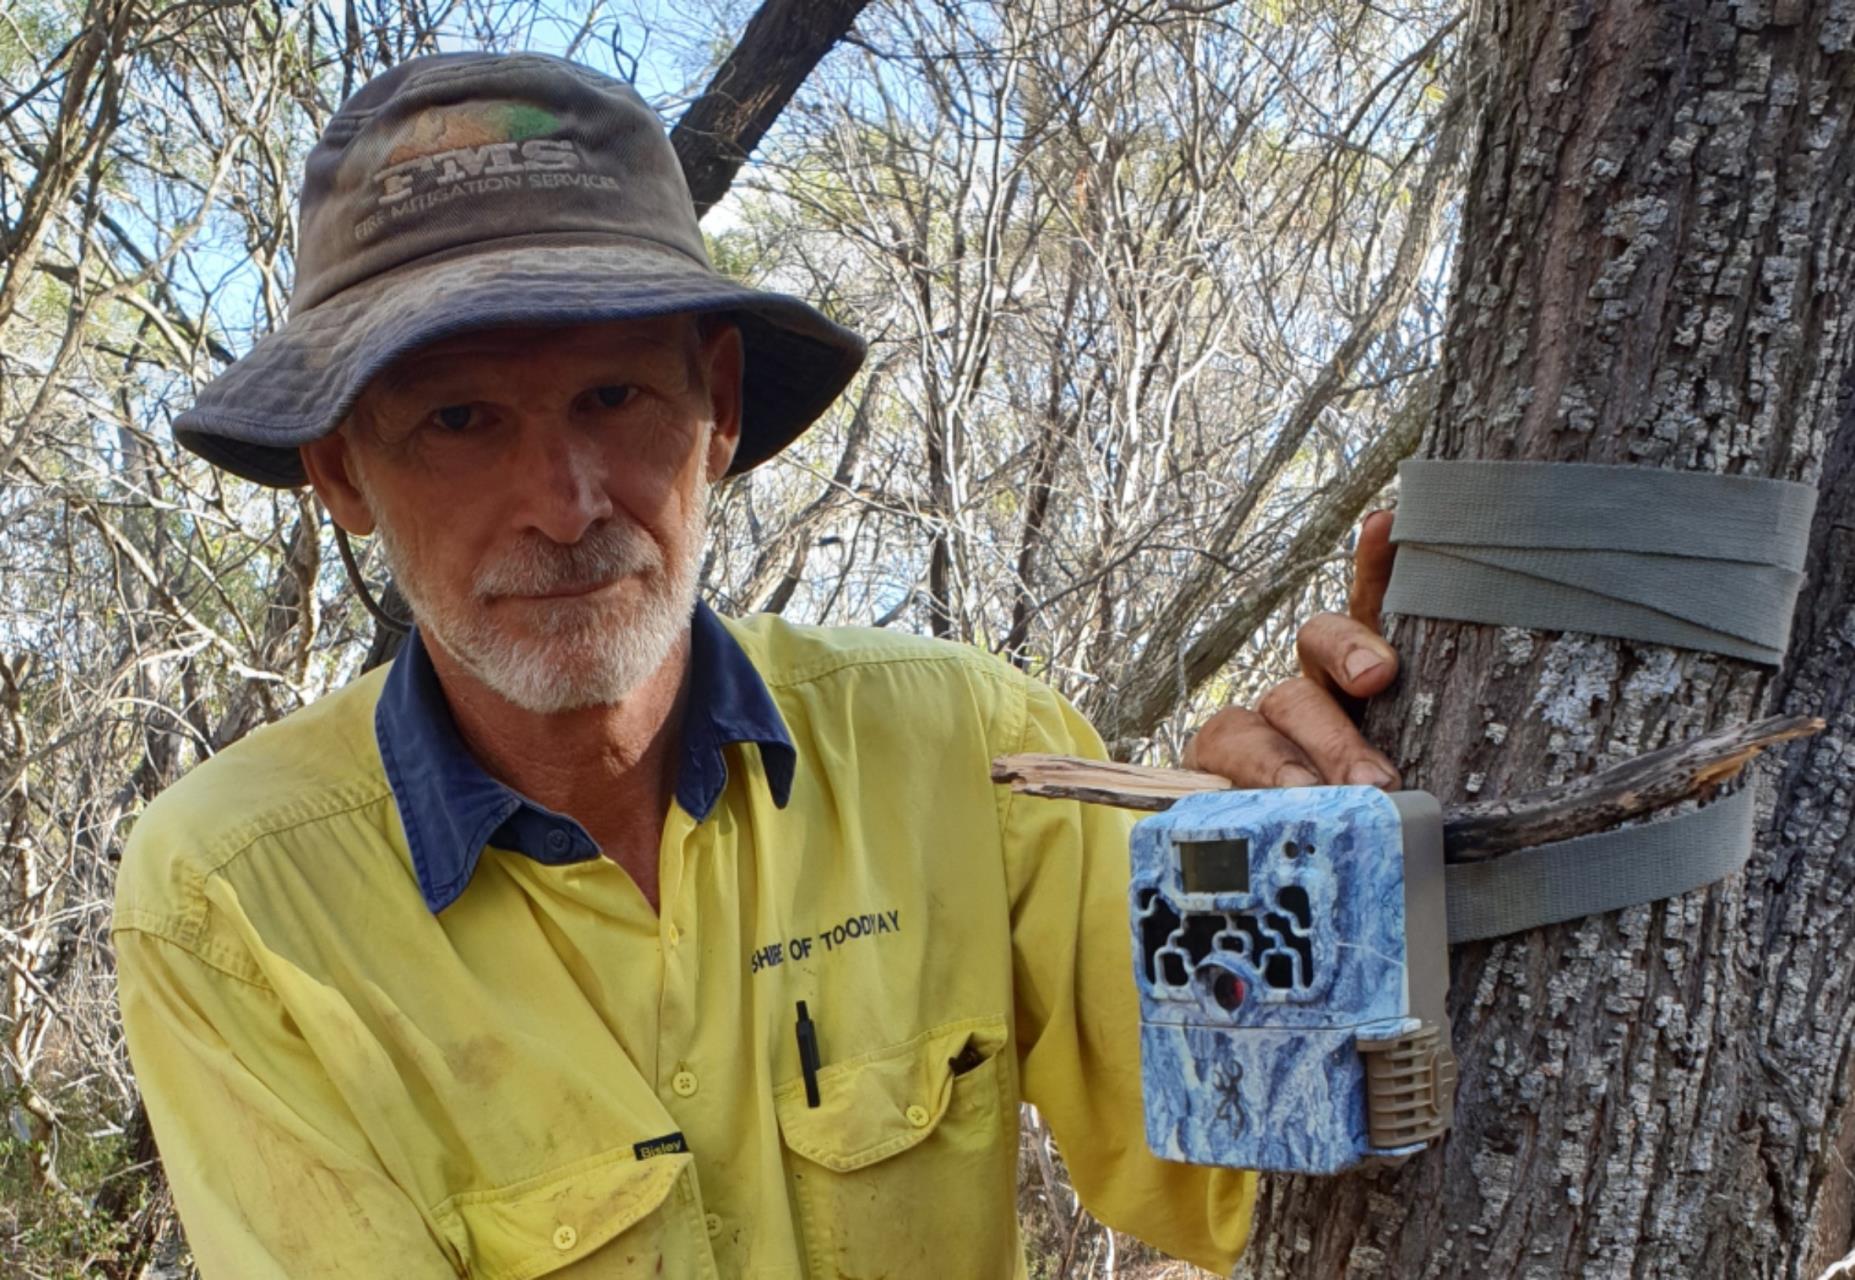 Pictured: Shire of Toodyay Reserves Management Officer Greg Warburton inspecting a sensor camera.